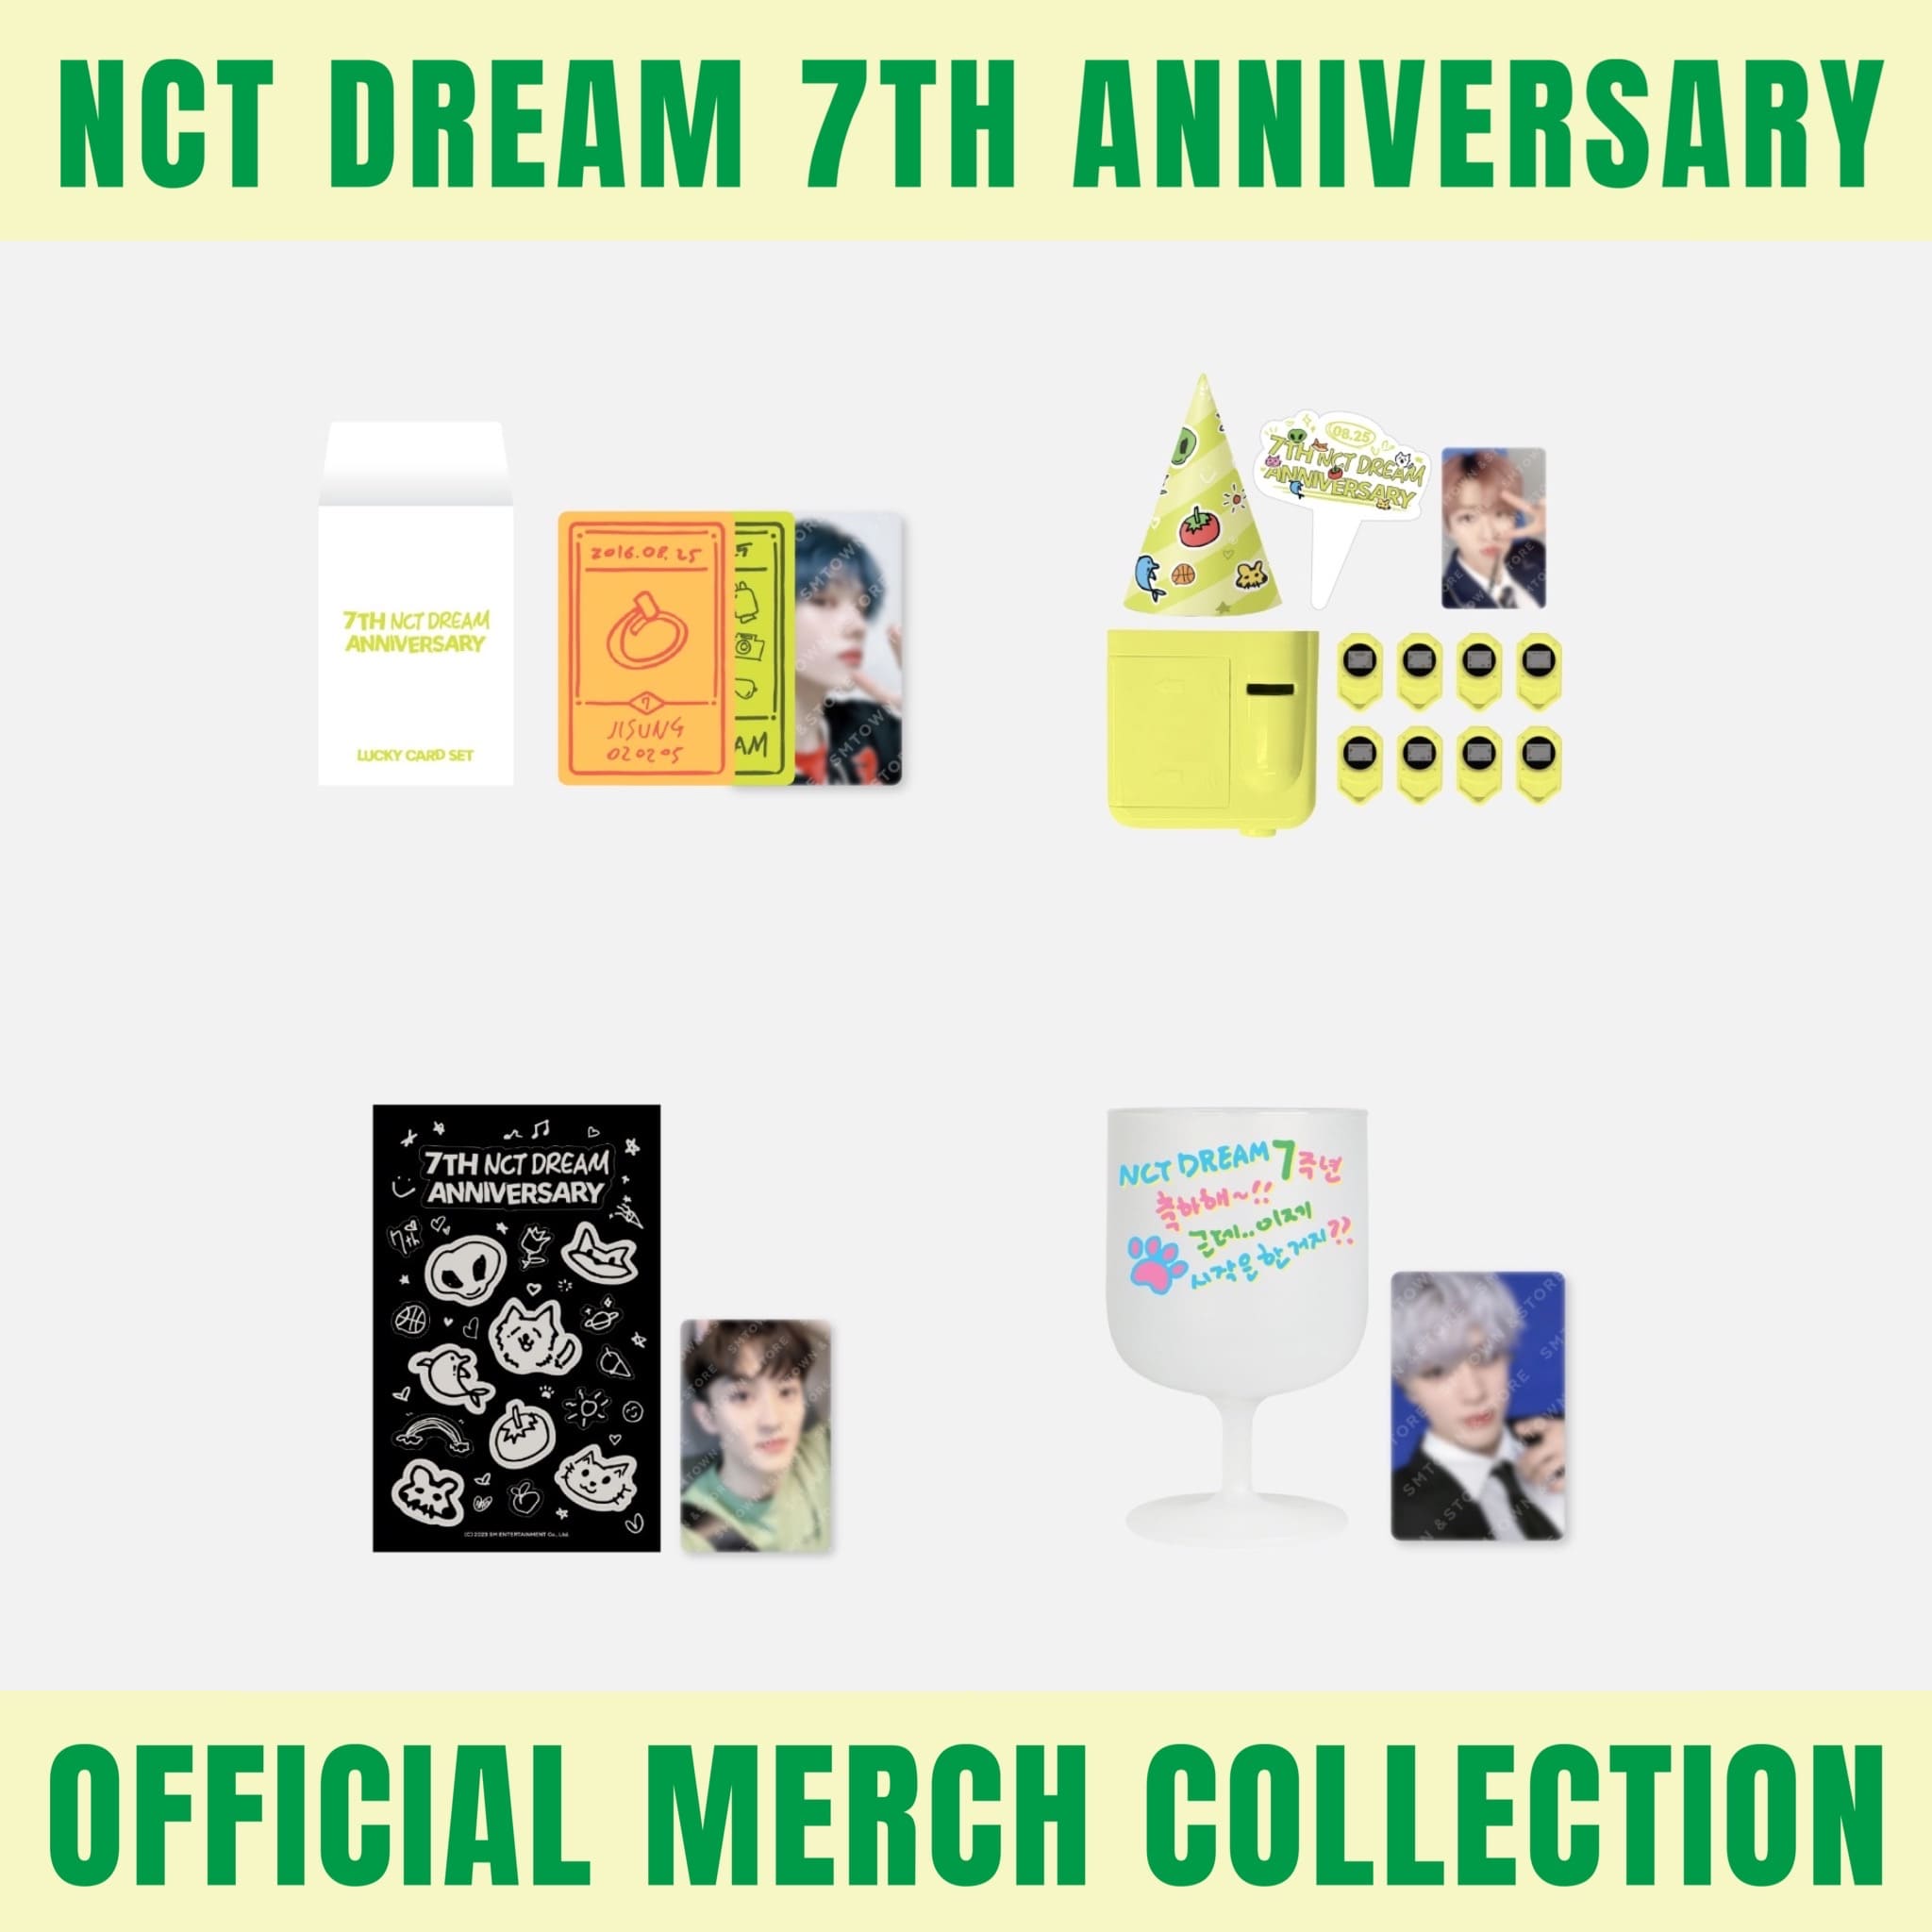 NCT DREAM 7TH ANNIVERSARY OFFICIAL MD – Bora Clover